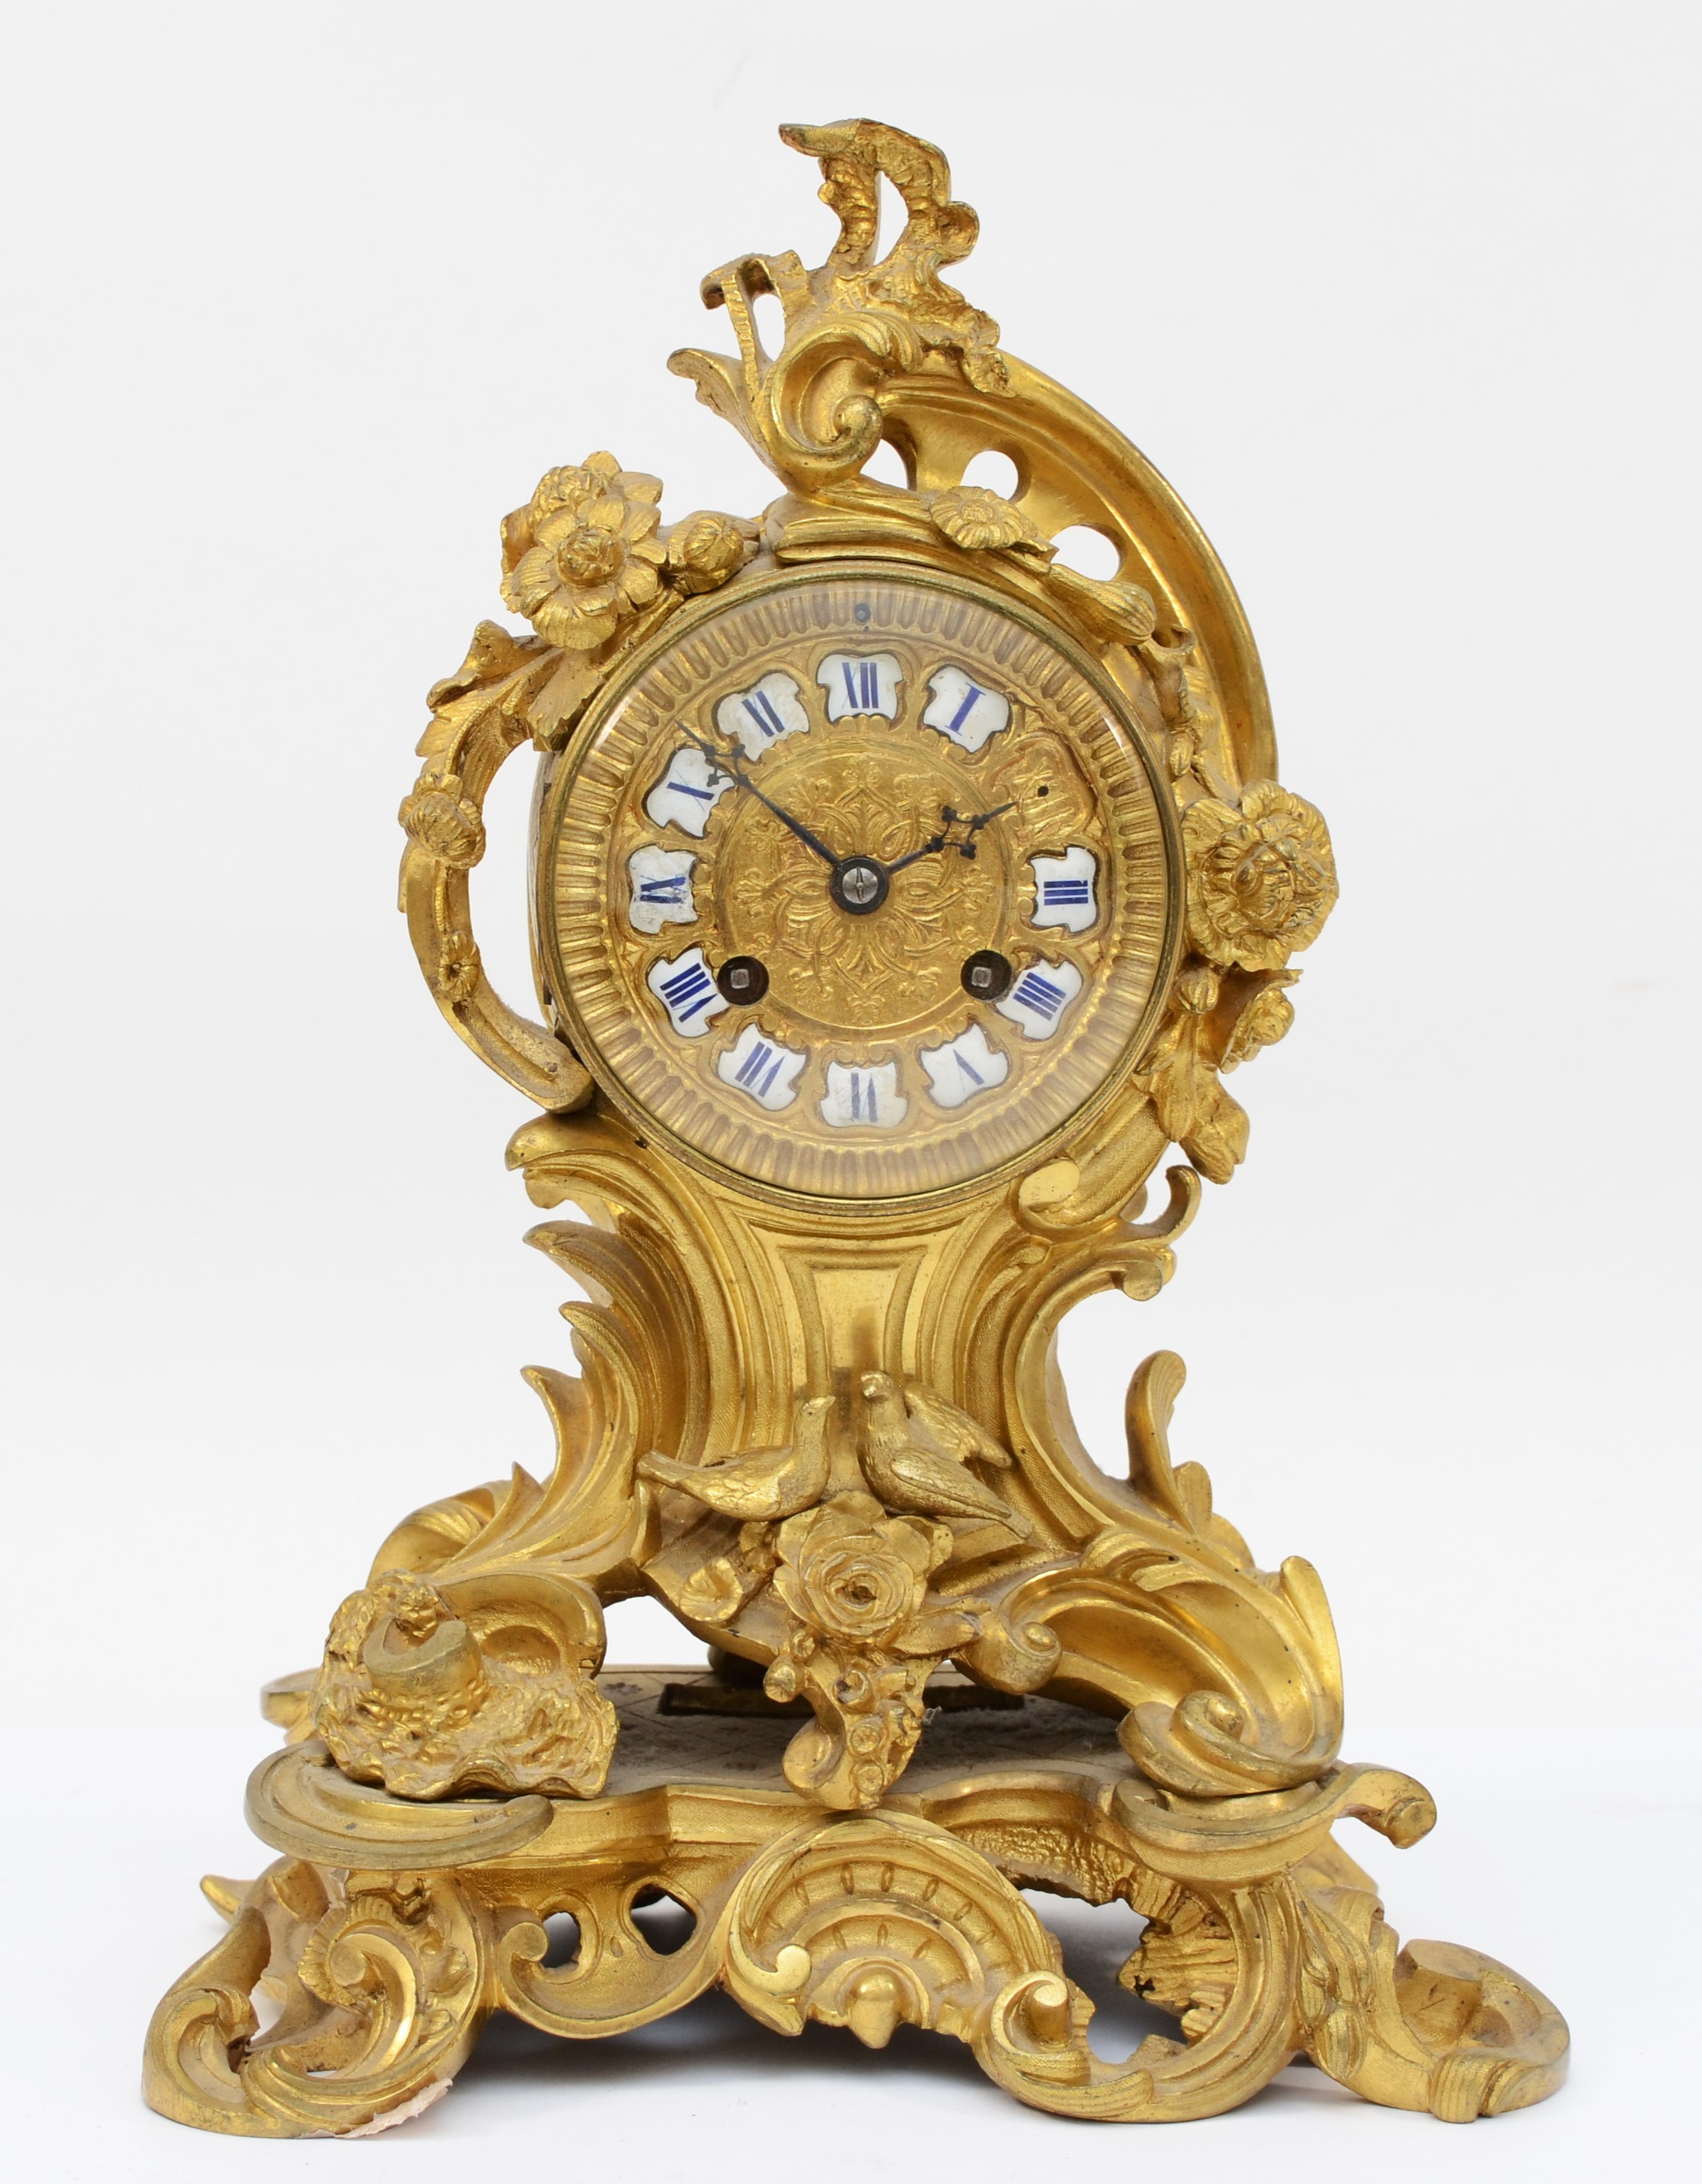 A late 19th century, probably French gilt brass mantle clock, the gilt dial with applied enamel